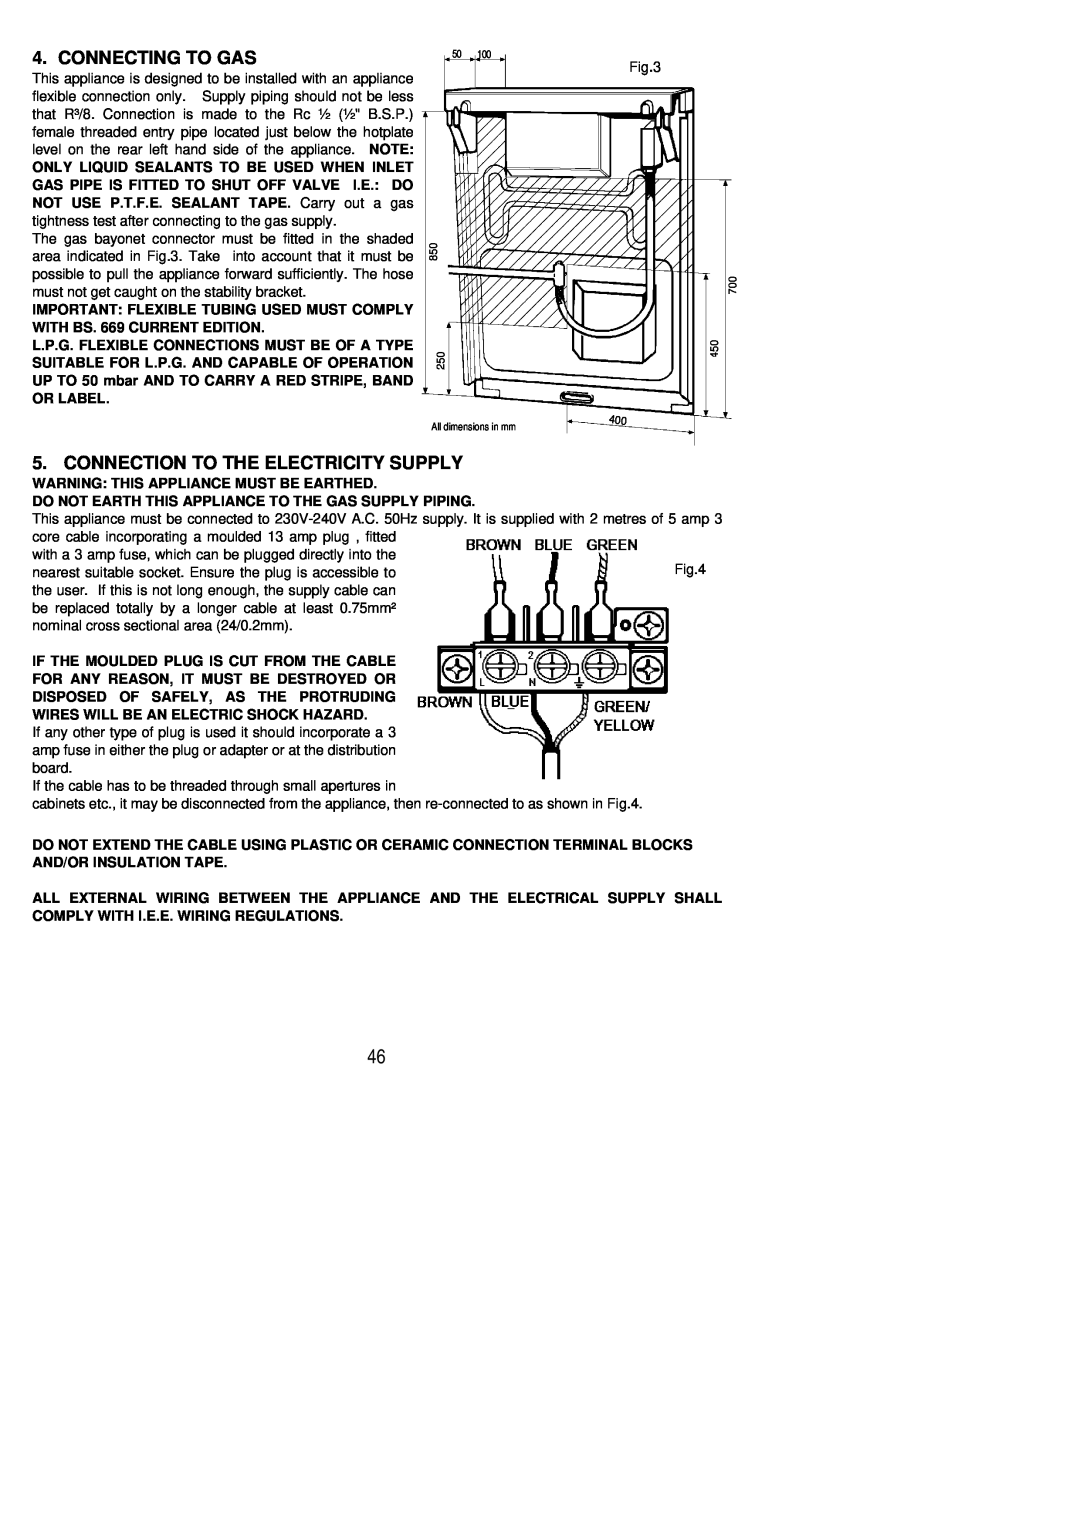 Zanussi ZCG 8021 manual Connecting To Gas, Connection To The Electricity Supply 